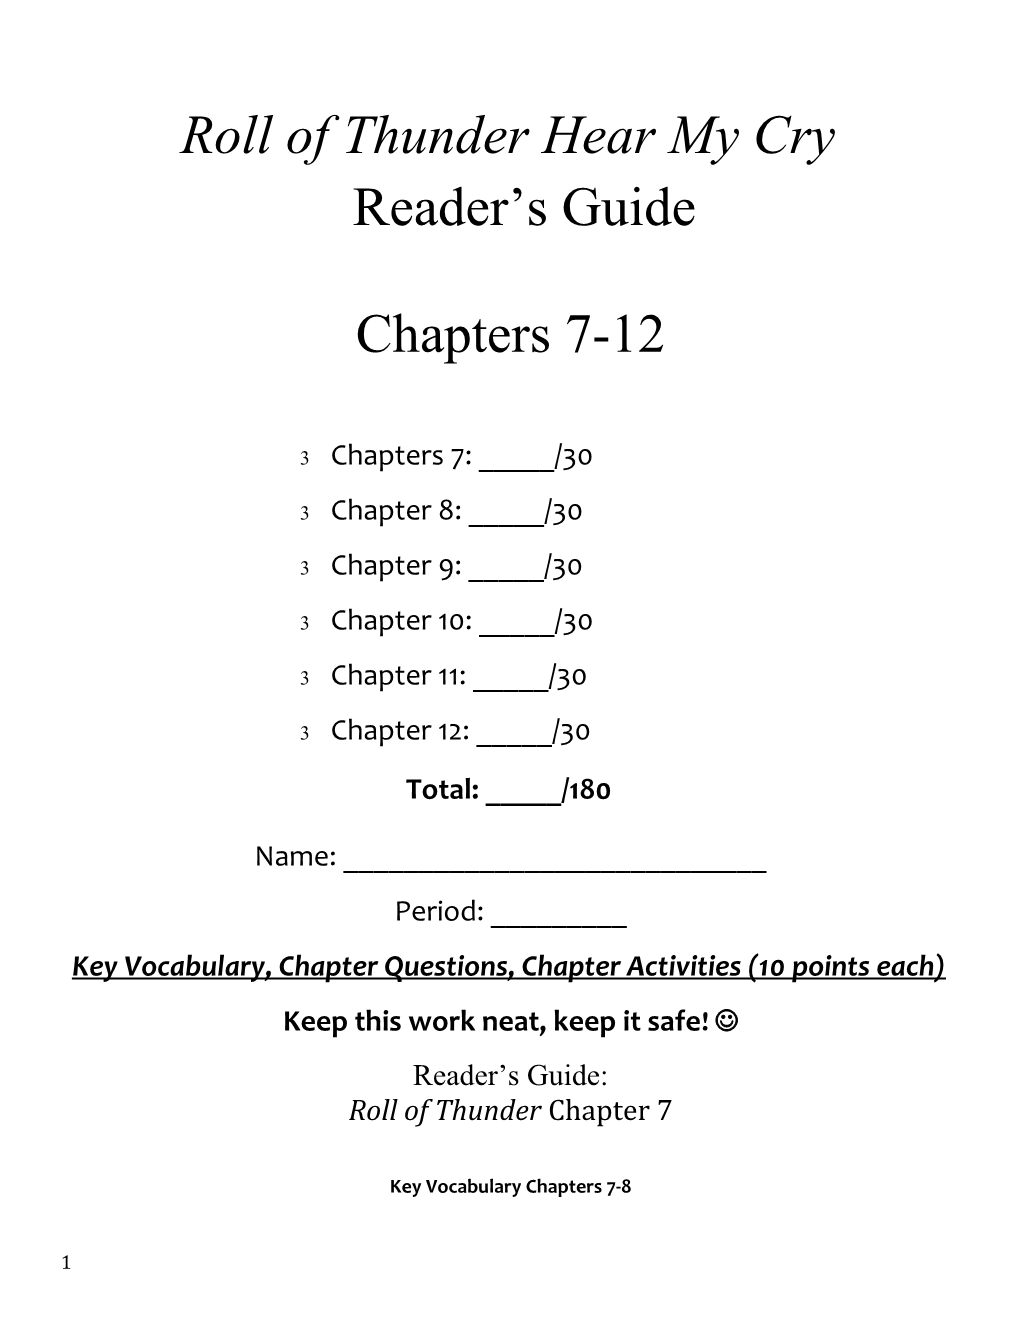 Key Vocabulary, Chapter Questions, Chapter Activities (10 Points Each)